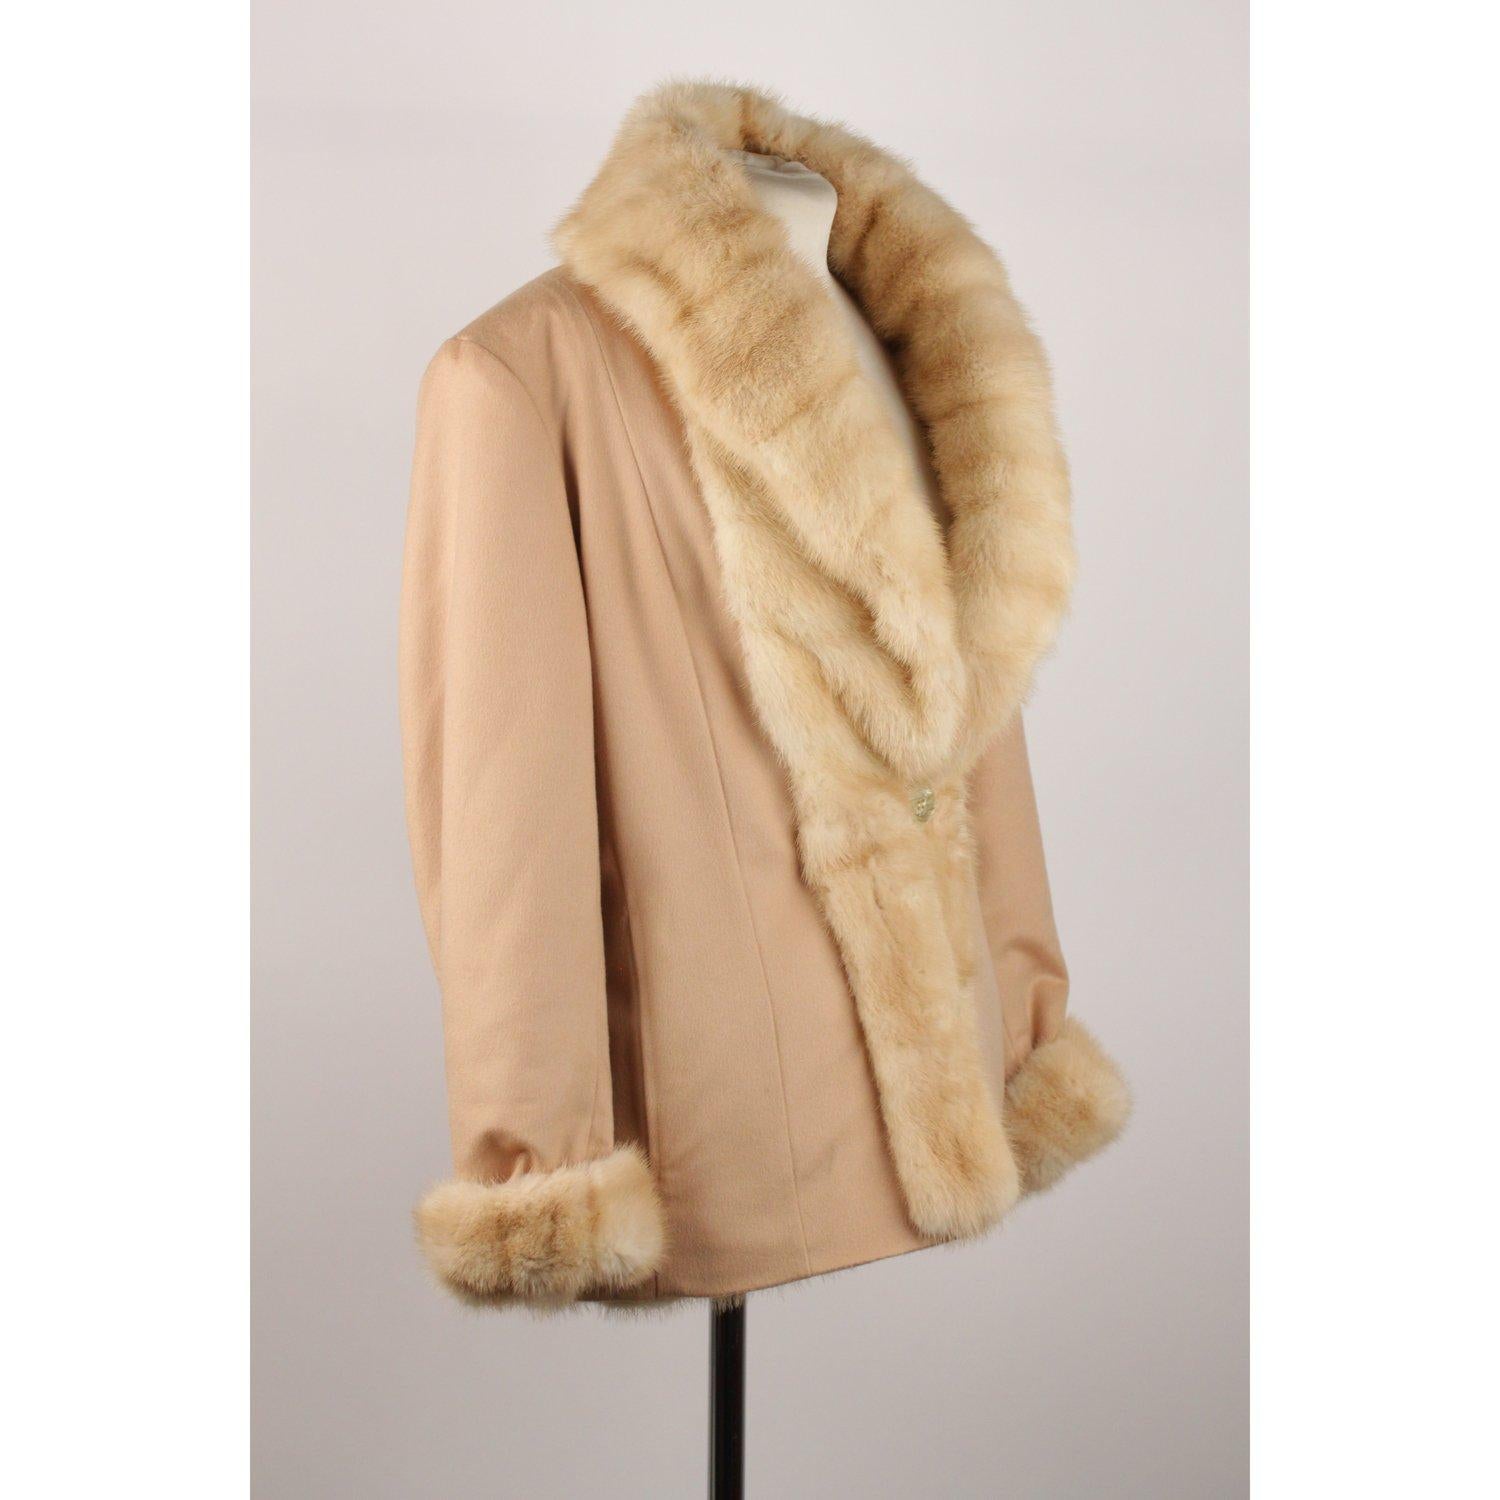  Reversible Jacket with Mink Fur Lining 1